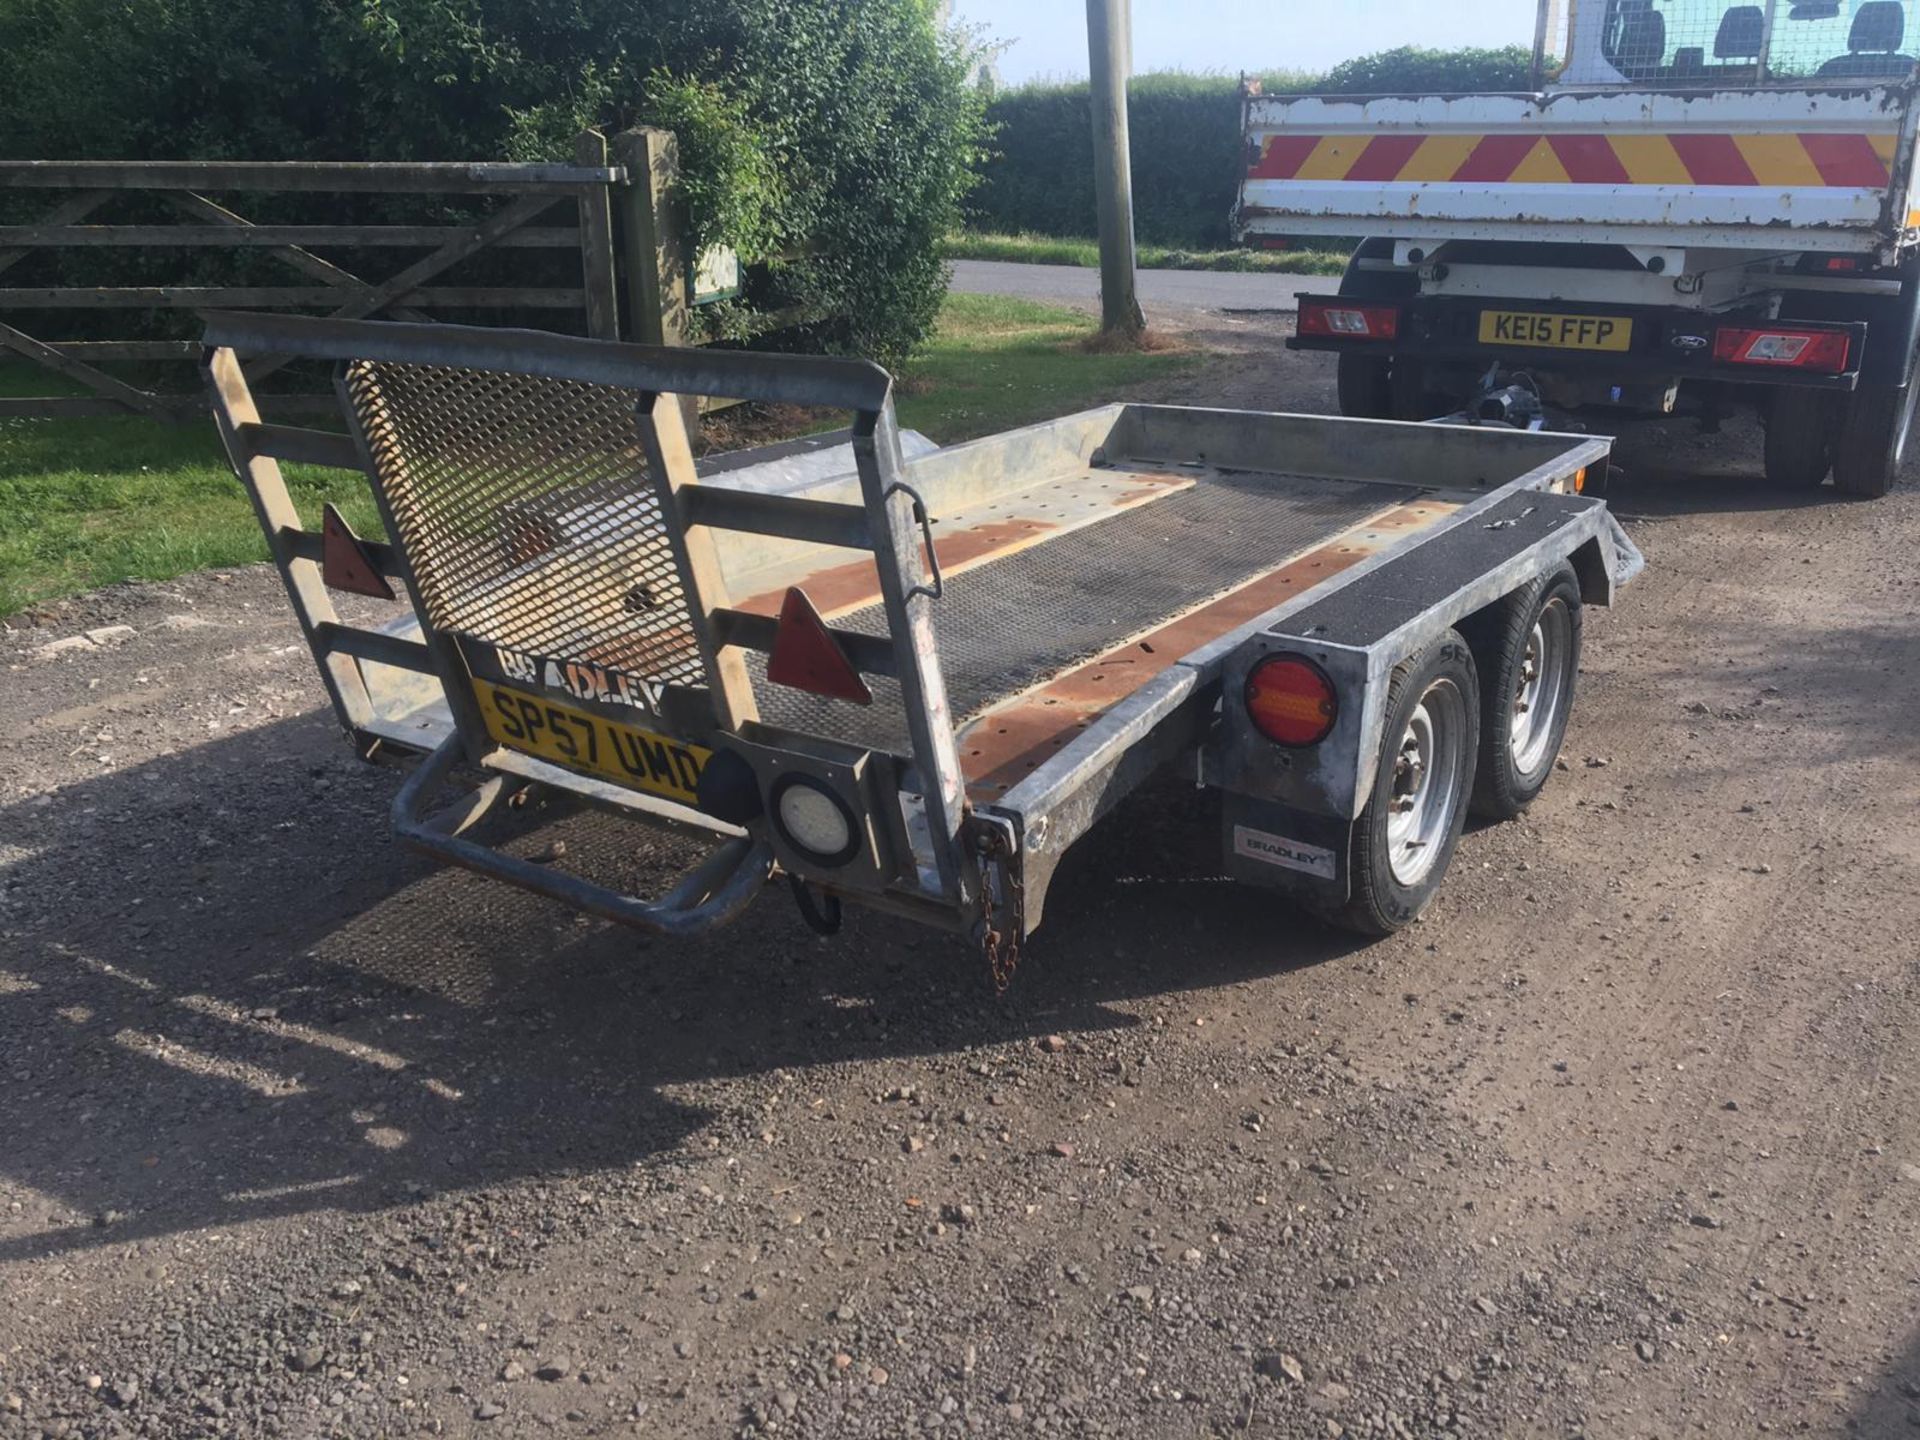 BRADLEY 2.6 ton TWIN AXLE PLANT TRAILER, ALL BRAKES TESTED AND HUBS GREASED, LIGHTS WORK *PLUS VAT* - Image 2 of 7